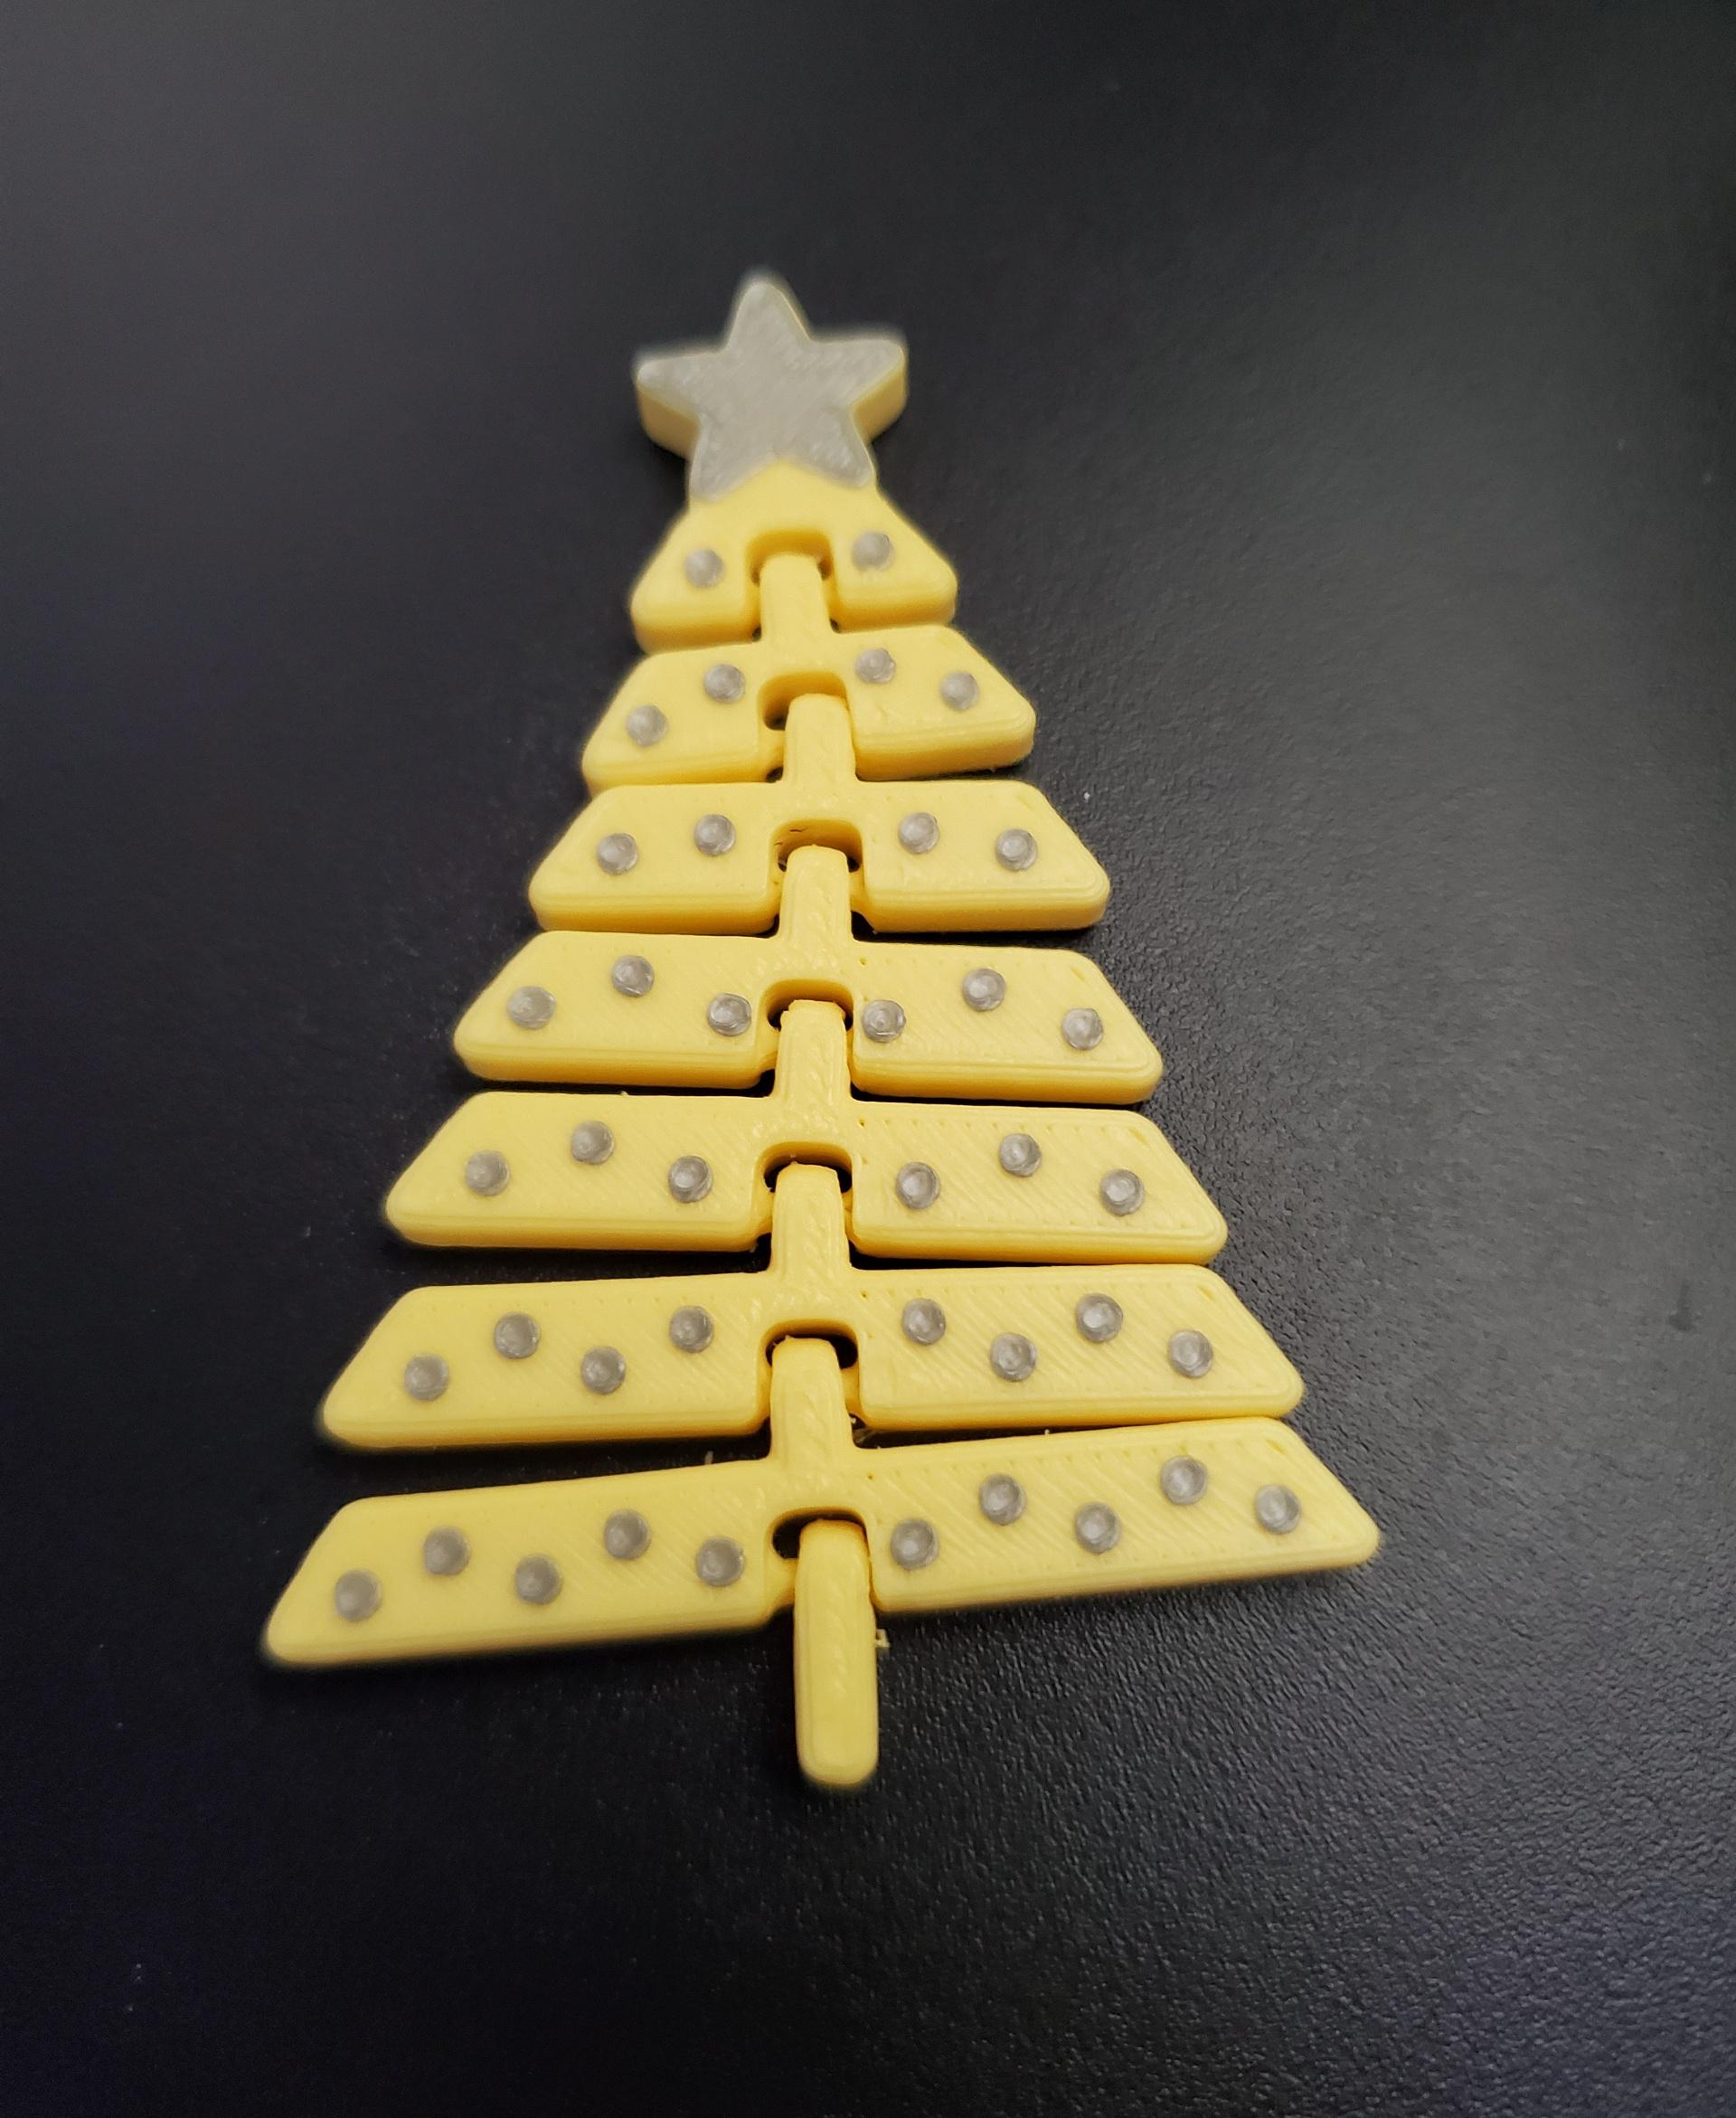 Articulated Christmas Tree with Star and Ornaments - Print in place fidget toys - 3mf - polyterra banana - 3d model